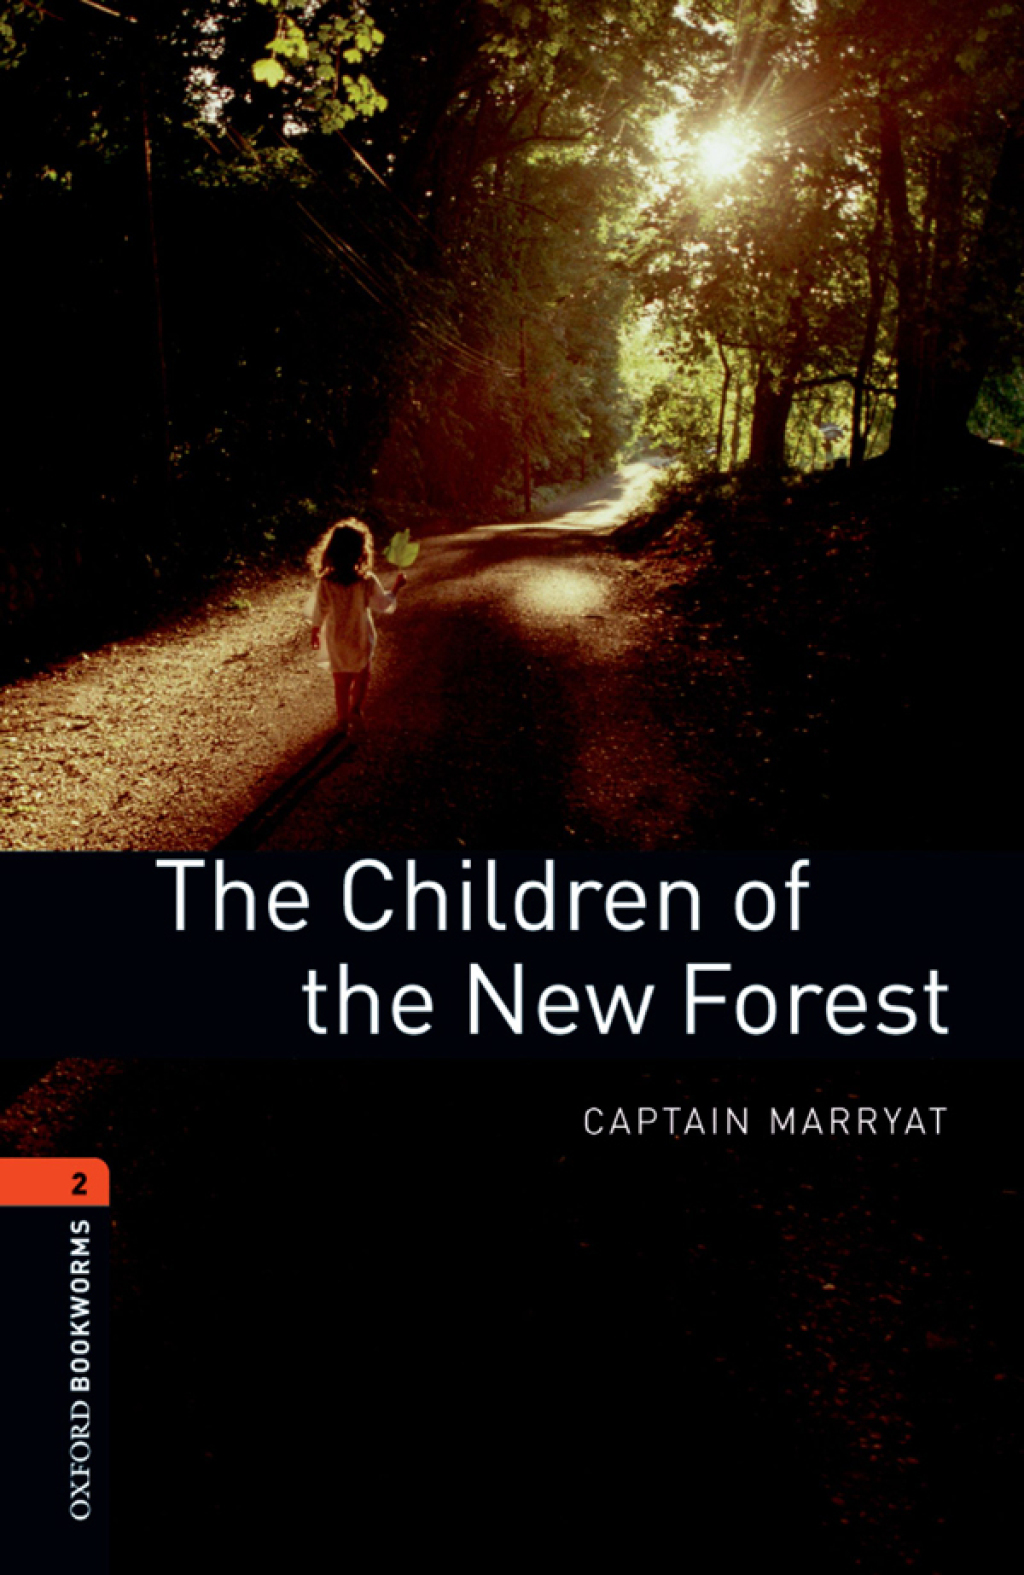 The Children of the New Forest Level 2 Oxford Bookworms Library - 3rd Edition (eBook Rental)